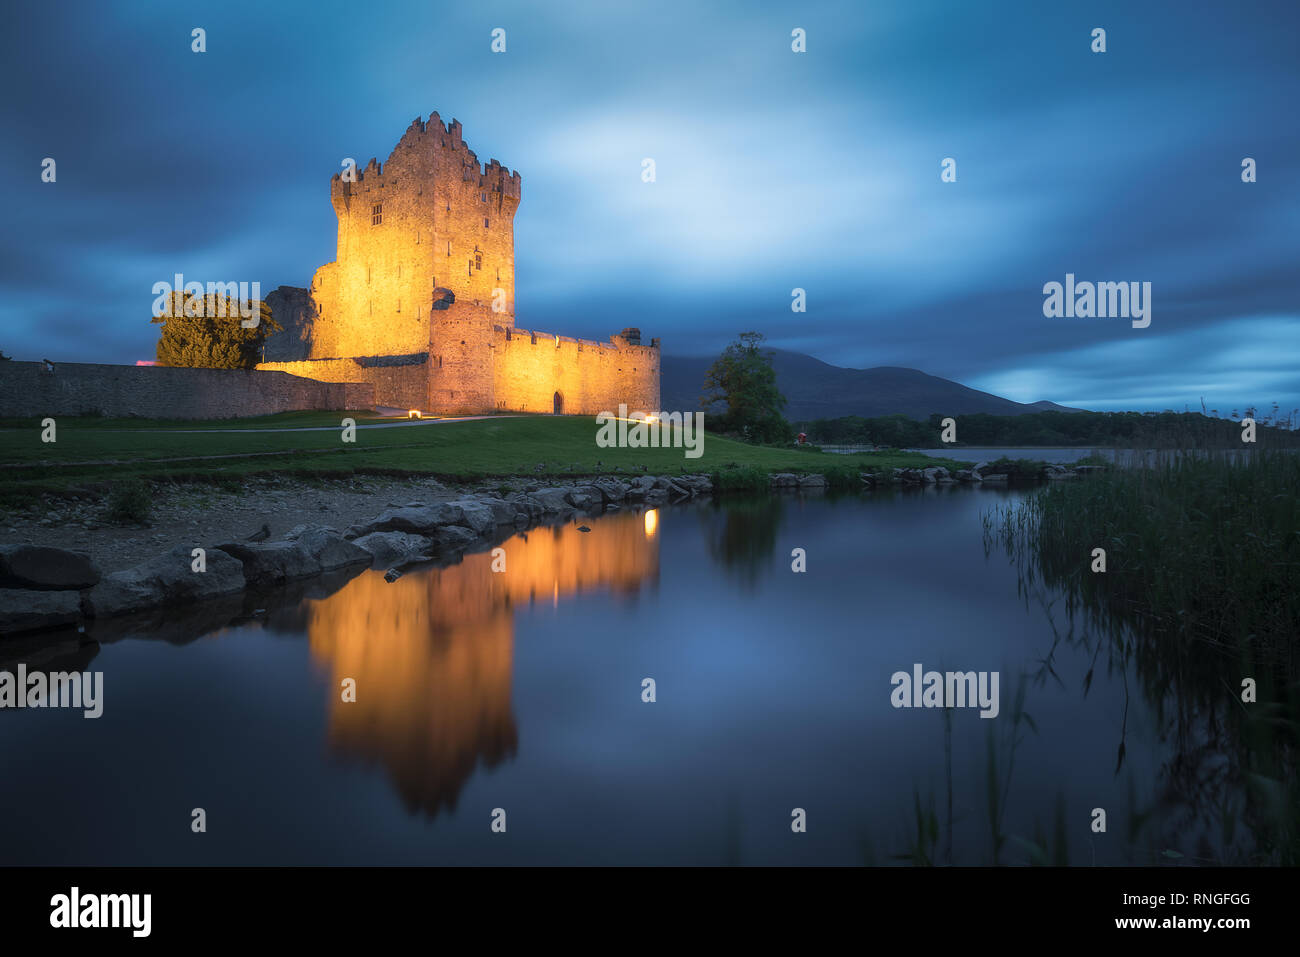 Ross Castle is a beautiful stronghold on the edge of Killarney’s lower lake, built by O’Donoghue Mór in the 15th century. Stock Photo